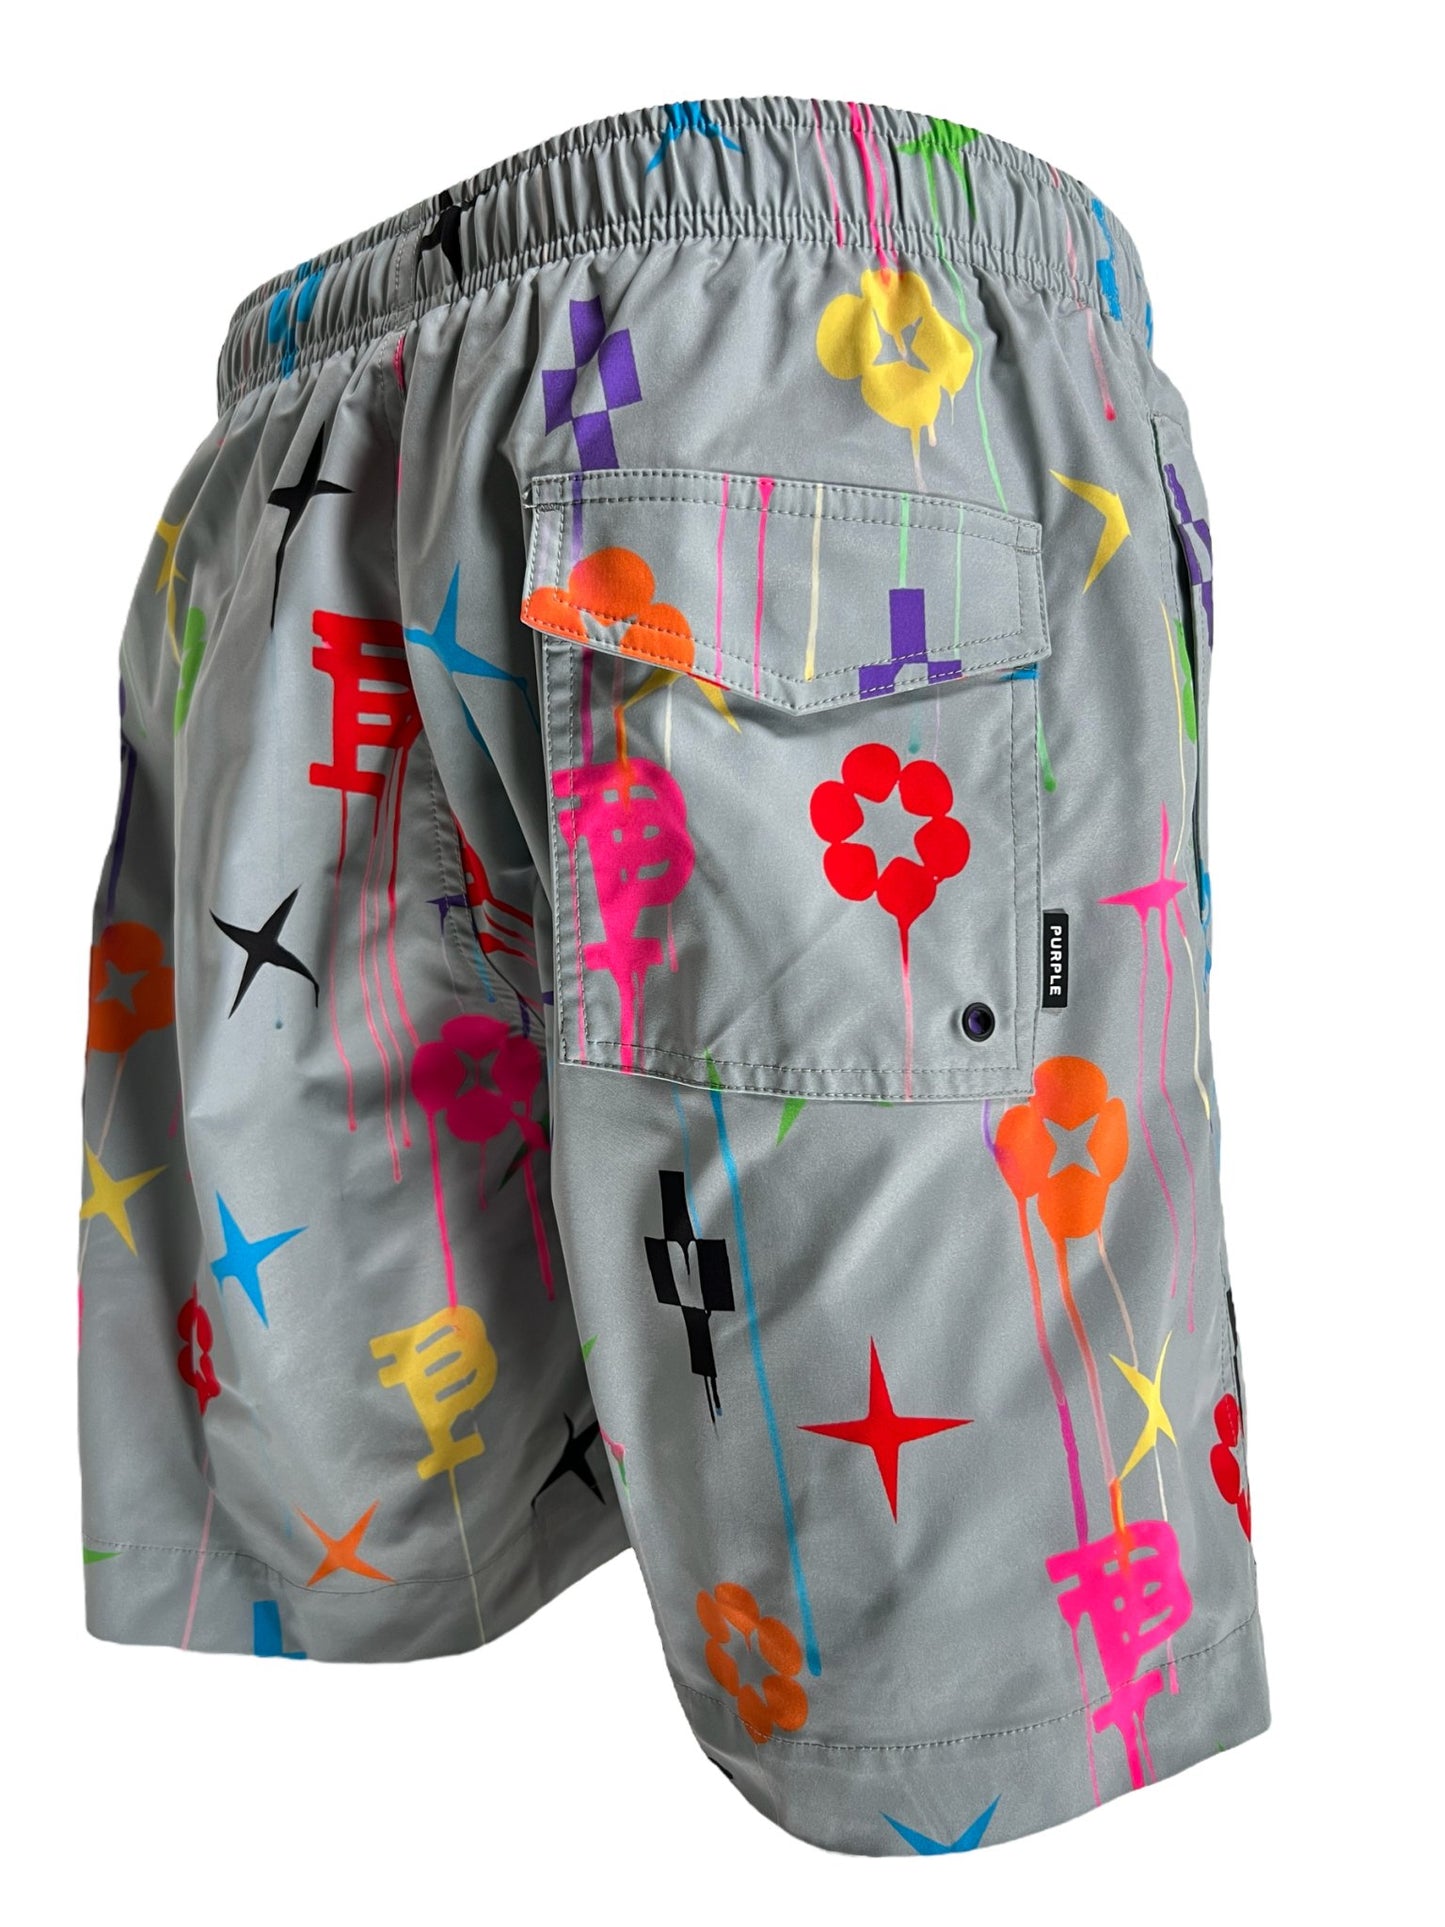 A pair of gray shorts with an elastic waistband, featuring a vibrant print of stars, flowers, and geometric shapes. These PURPLE BRAND P504-PGPM ALL ROUND SHORT AOP also include a back pocket with a button closure for added convenience.